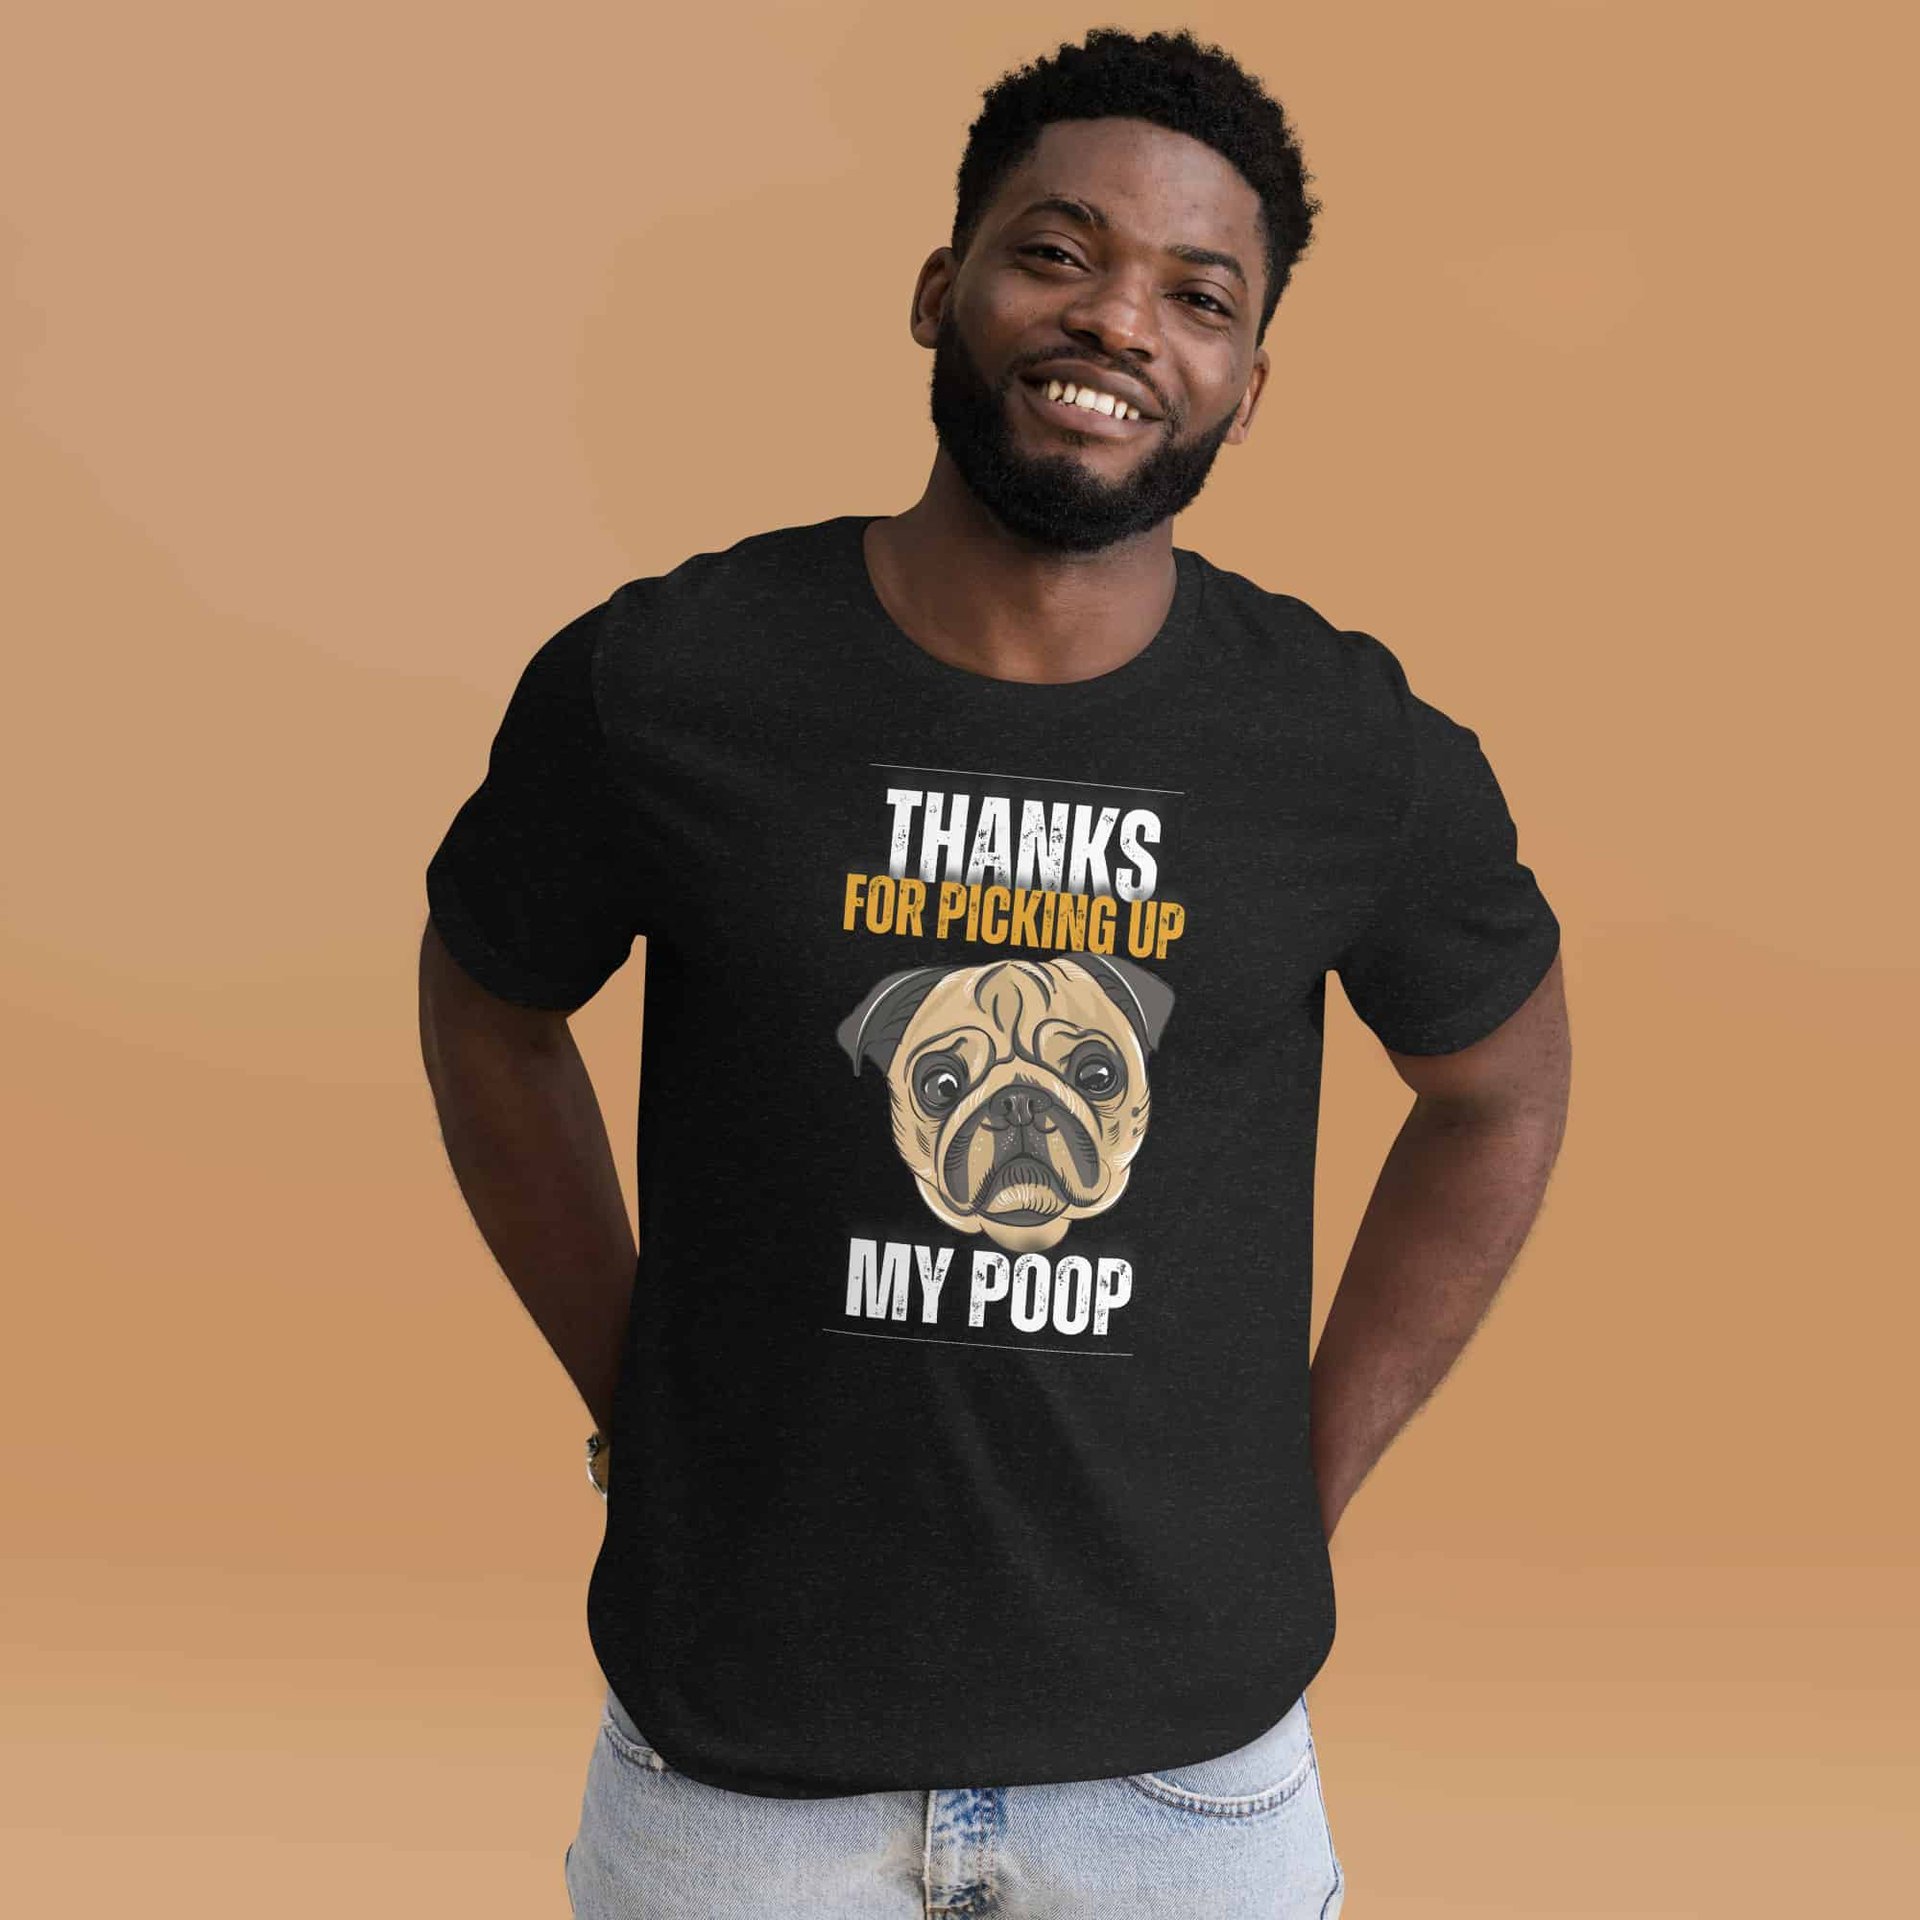 Thanks For Picking Up My POOP Funny Bulldog Unisex T-Shir. Black Heather. Male